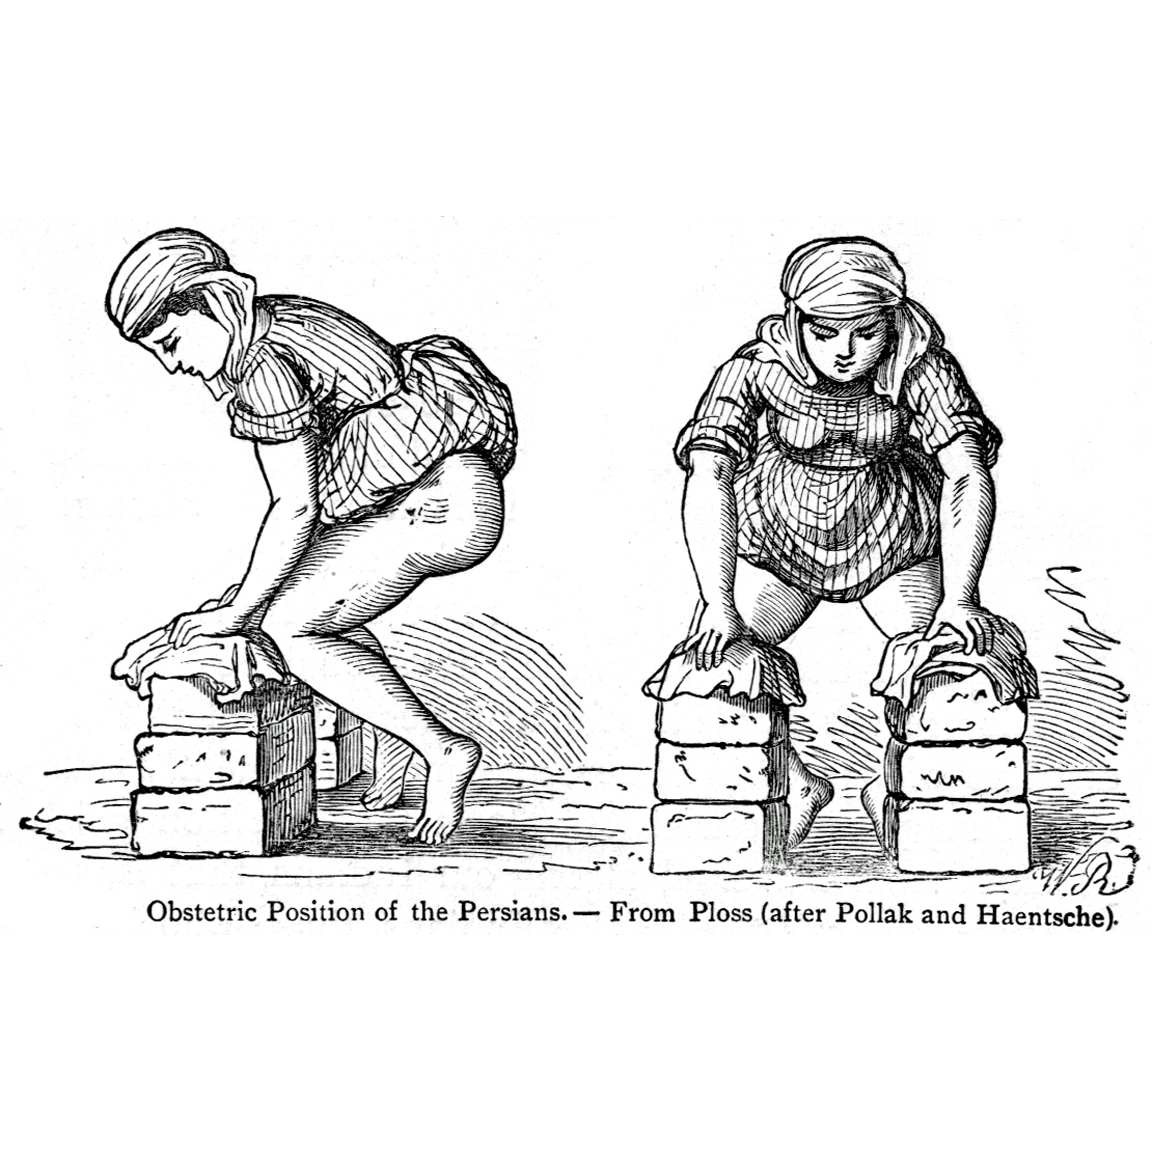 Obstetric posture among the Persians